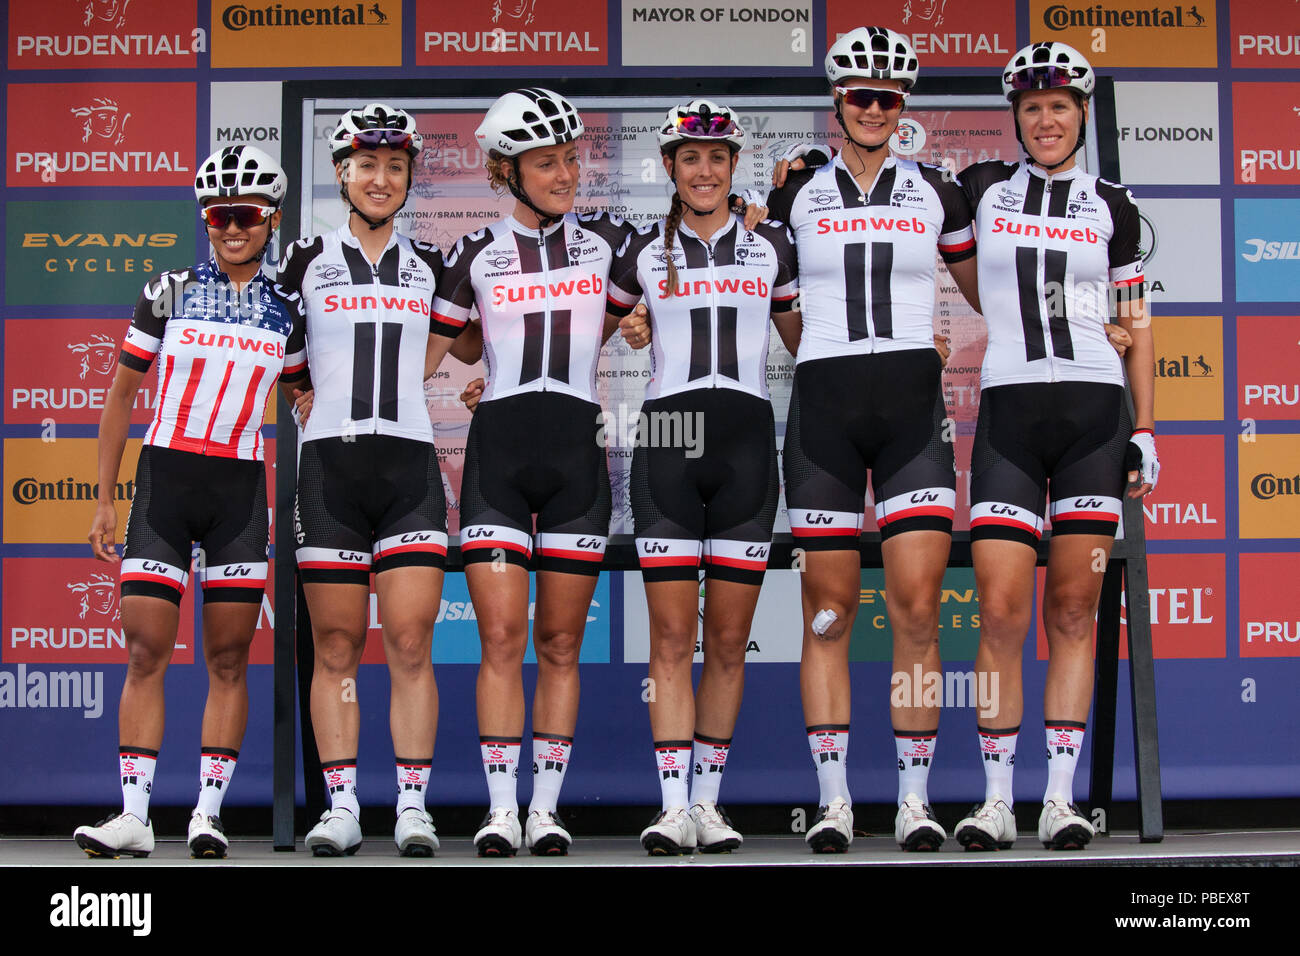 London, UK. 28th July, 2018. Elite riders from Team Sunweb, including reigning champion Coryn Rivera (l), prepare to compete in the Prudential RideLondon Classique, the richest women's one-day race in cycling. The race is part of the UCI Women's World Tour and offers spectators the opportunity to see the world's best women’s cycling teams battling it out over 12 laps of a closed 5.4km circuit starting and finishing on The Mall. Credit: Mark Kerrison/Alamy Live News Stock Photo